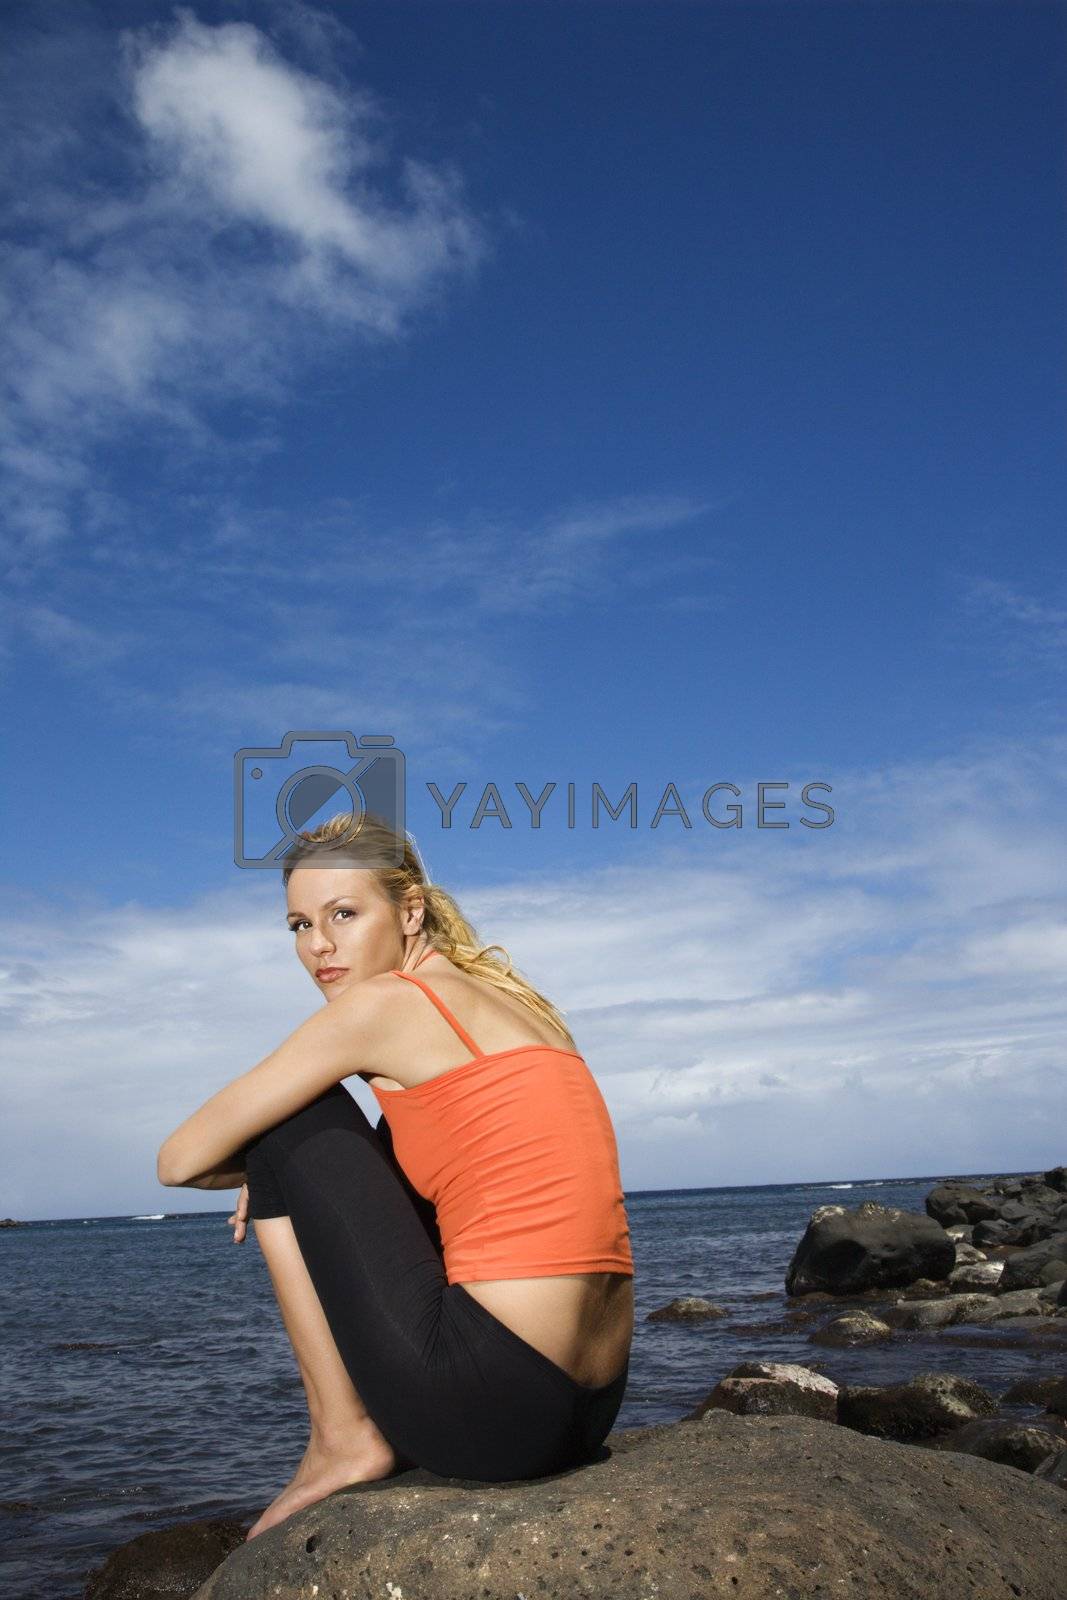 Royalty free image of Woman sitting on rocky shore. by iofoto